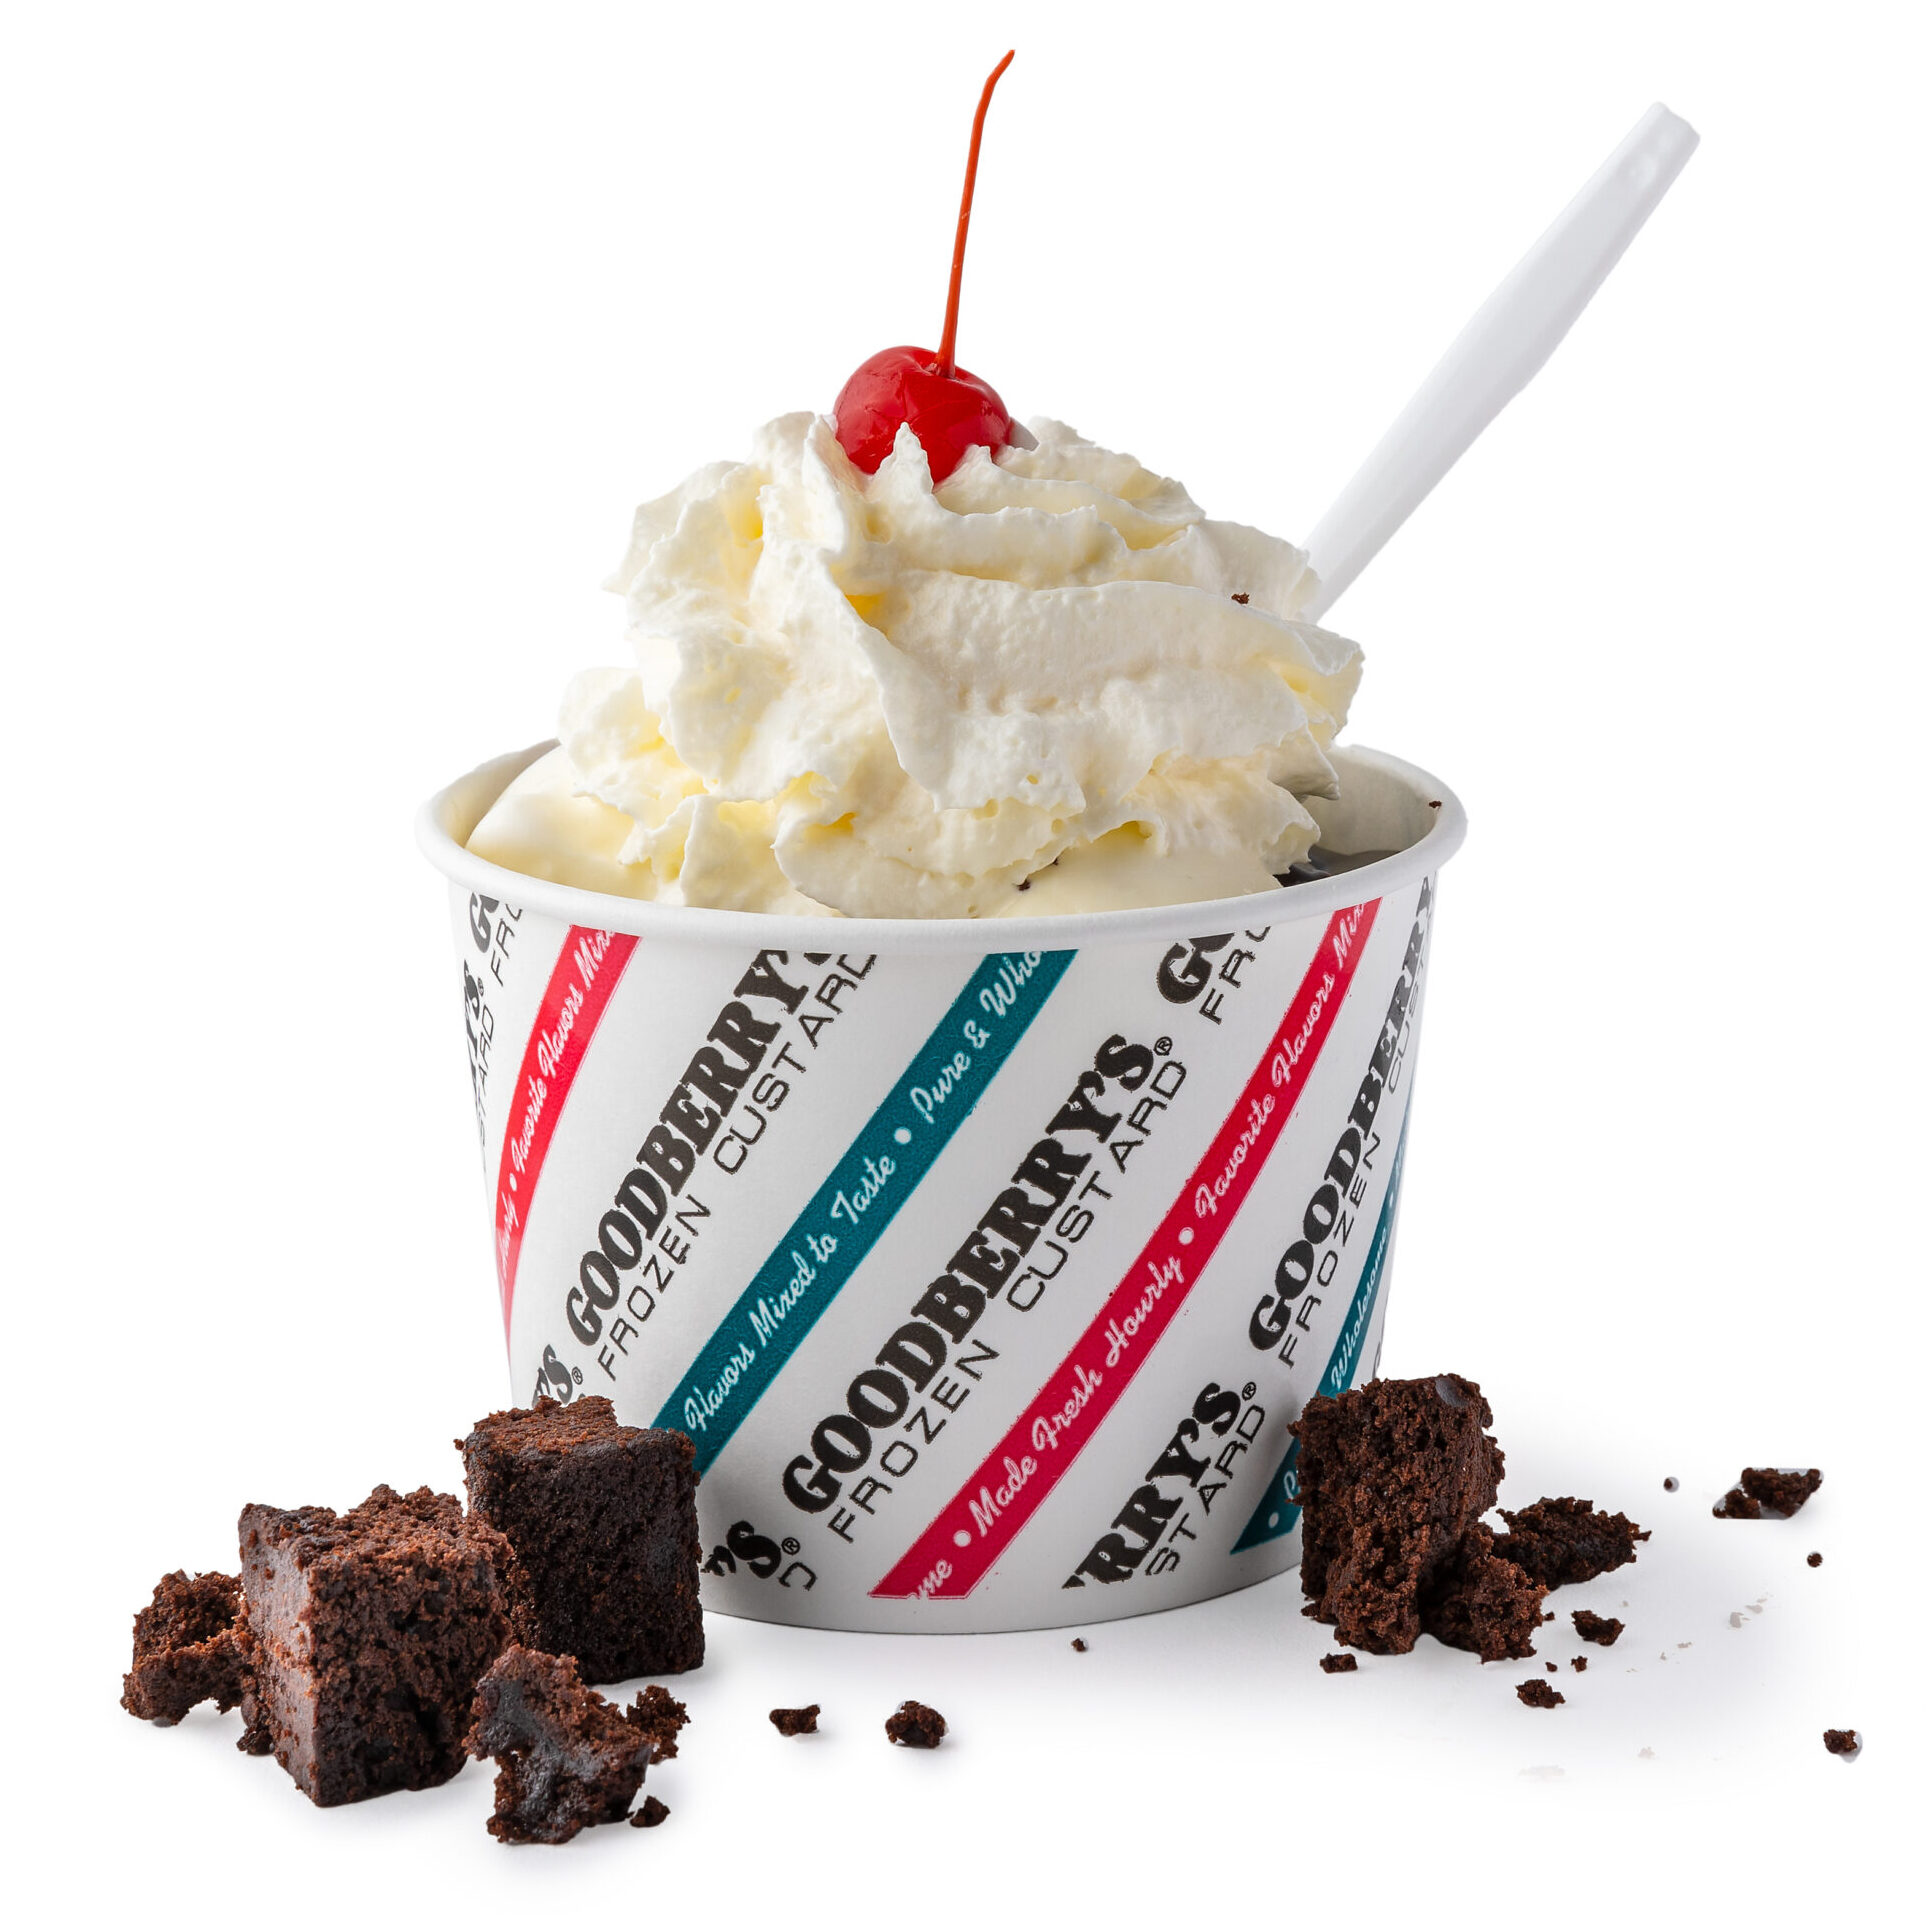 Cater your next event with Goodberry's frozen custard